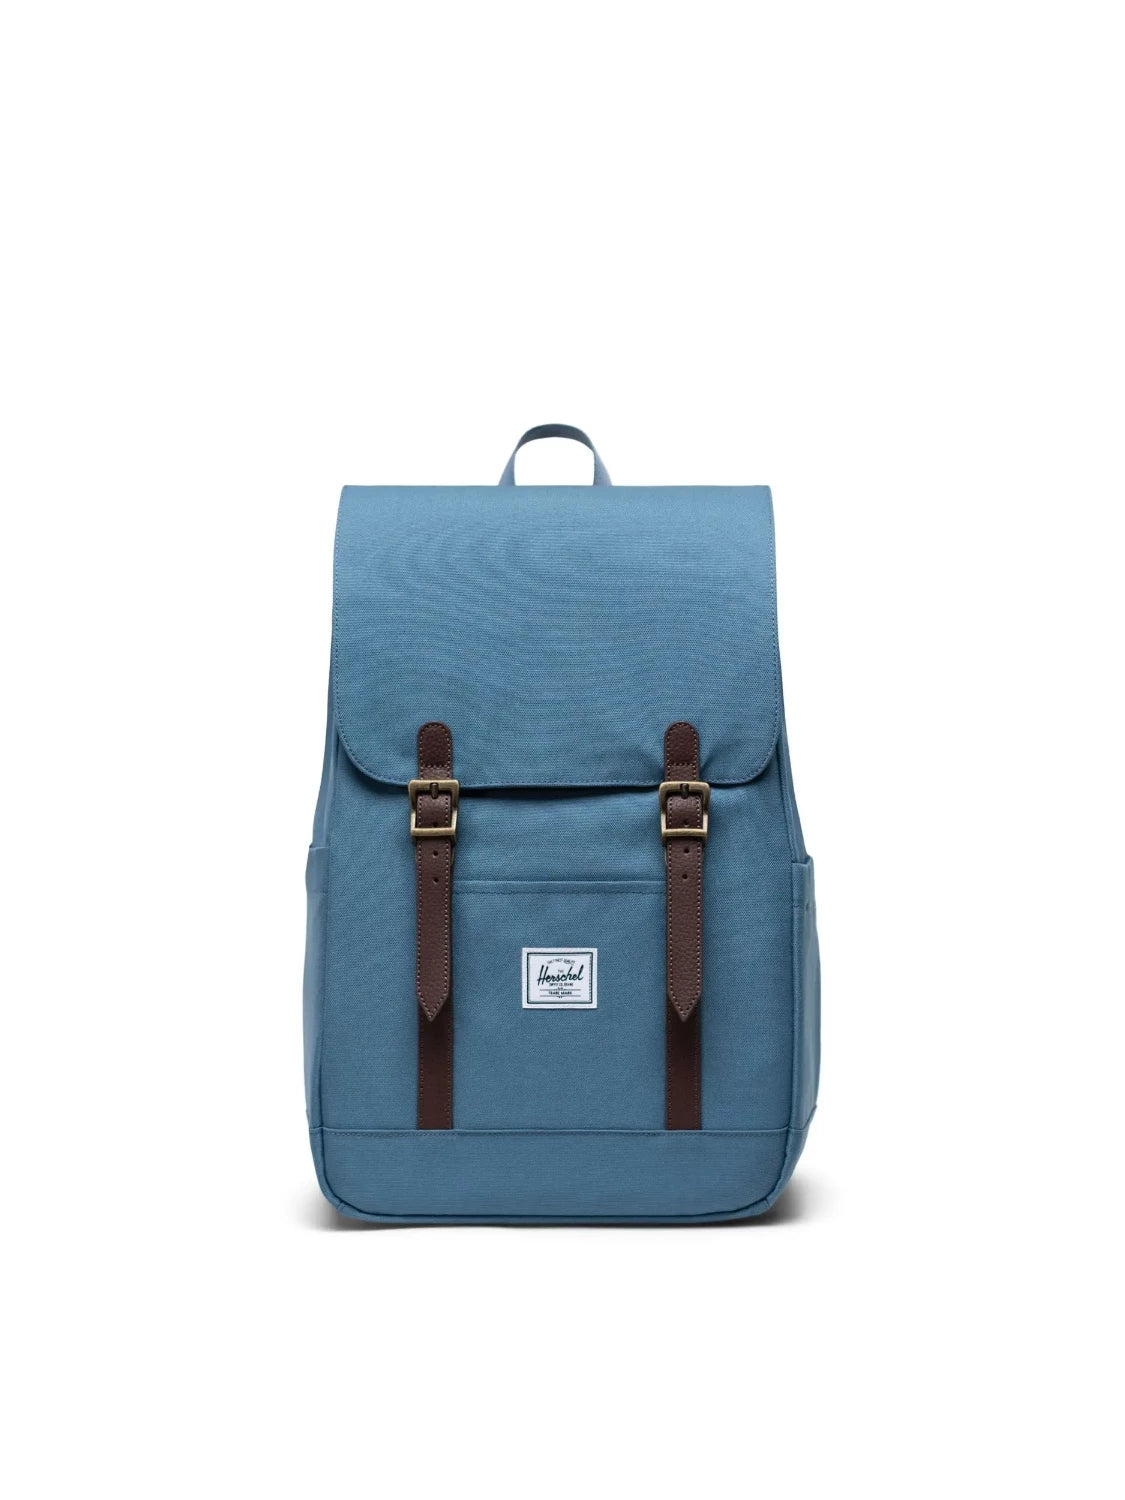 HSC RETREAT SMALL BACKPACK STEEL BLUE